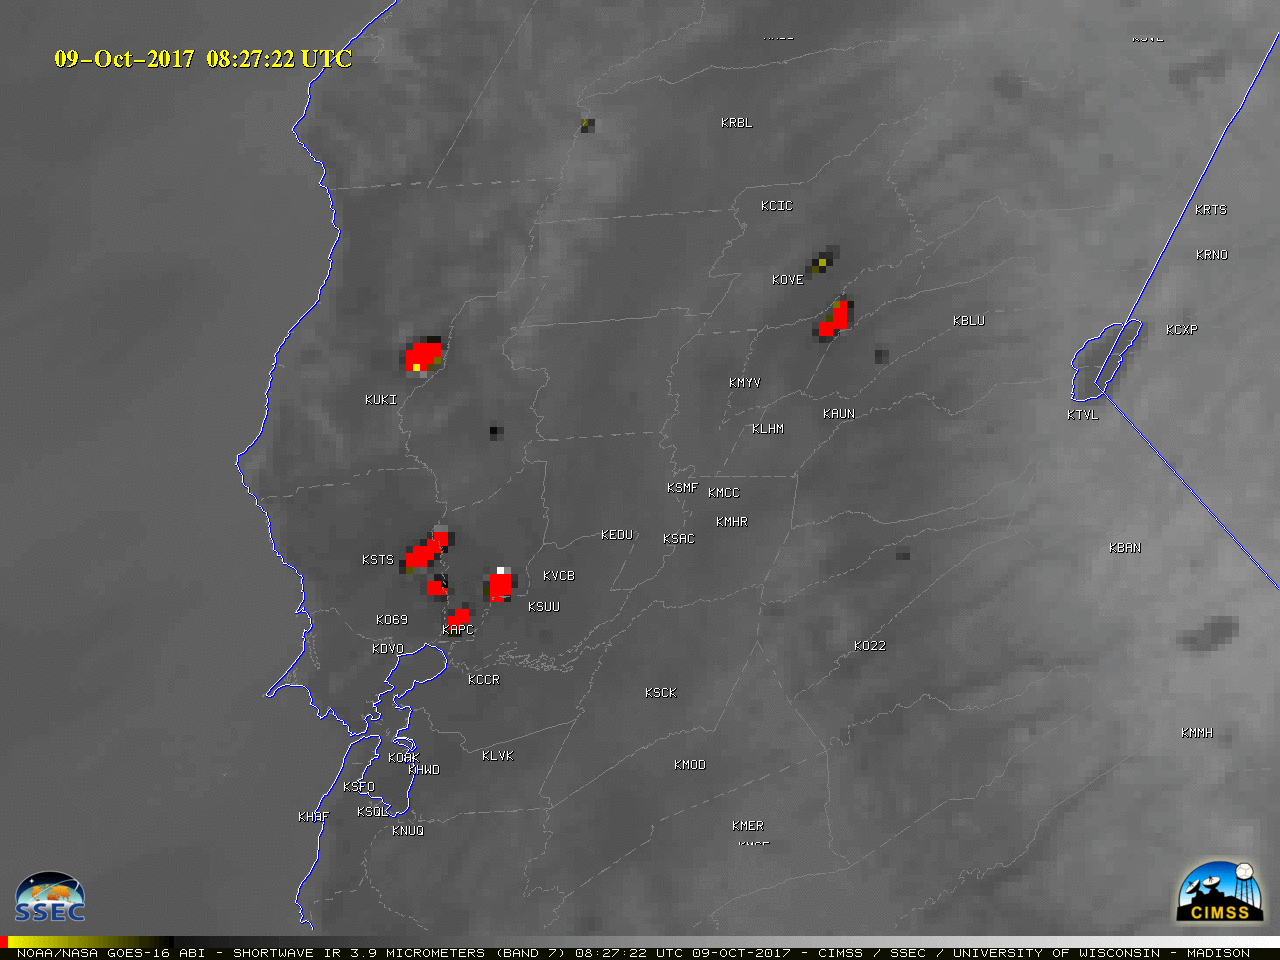 GOES-16 Shortwave Infrared (3.9 µm) images, with county outlines plotted in gray (dashed) and surface station identifiers plotted in white [click to play MP4 animation]